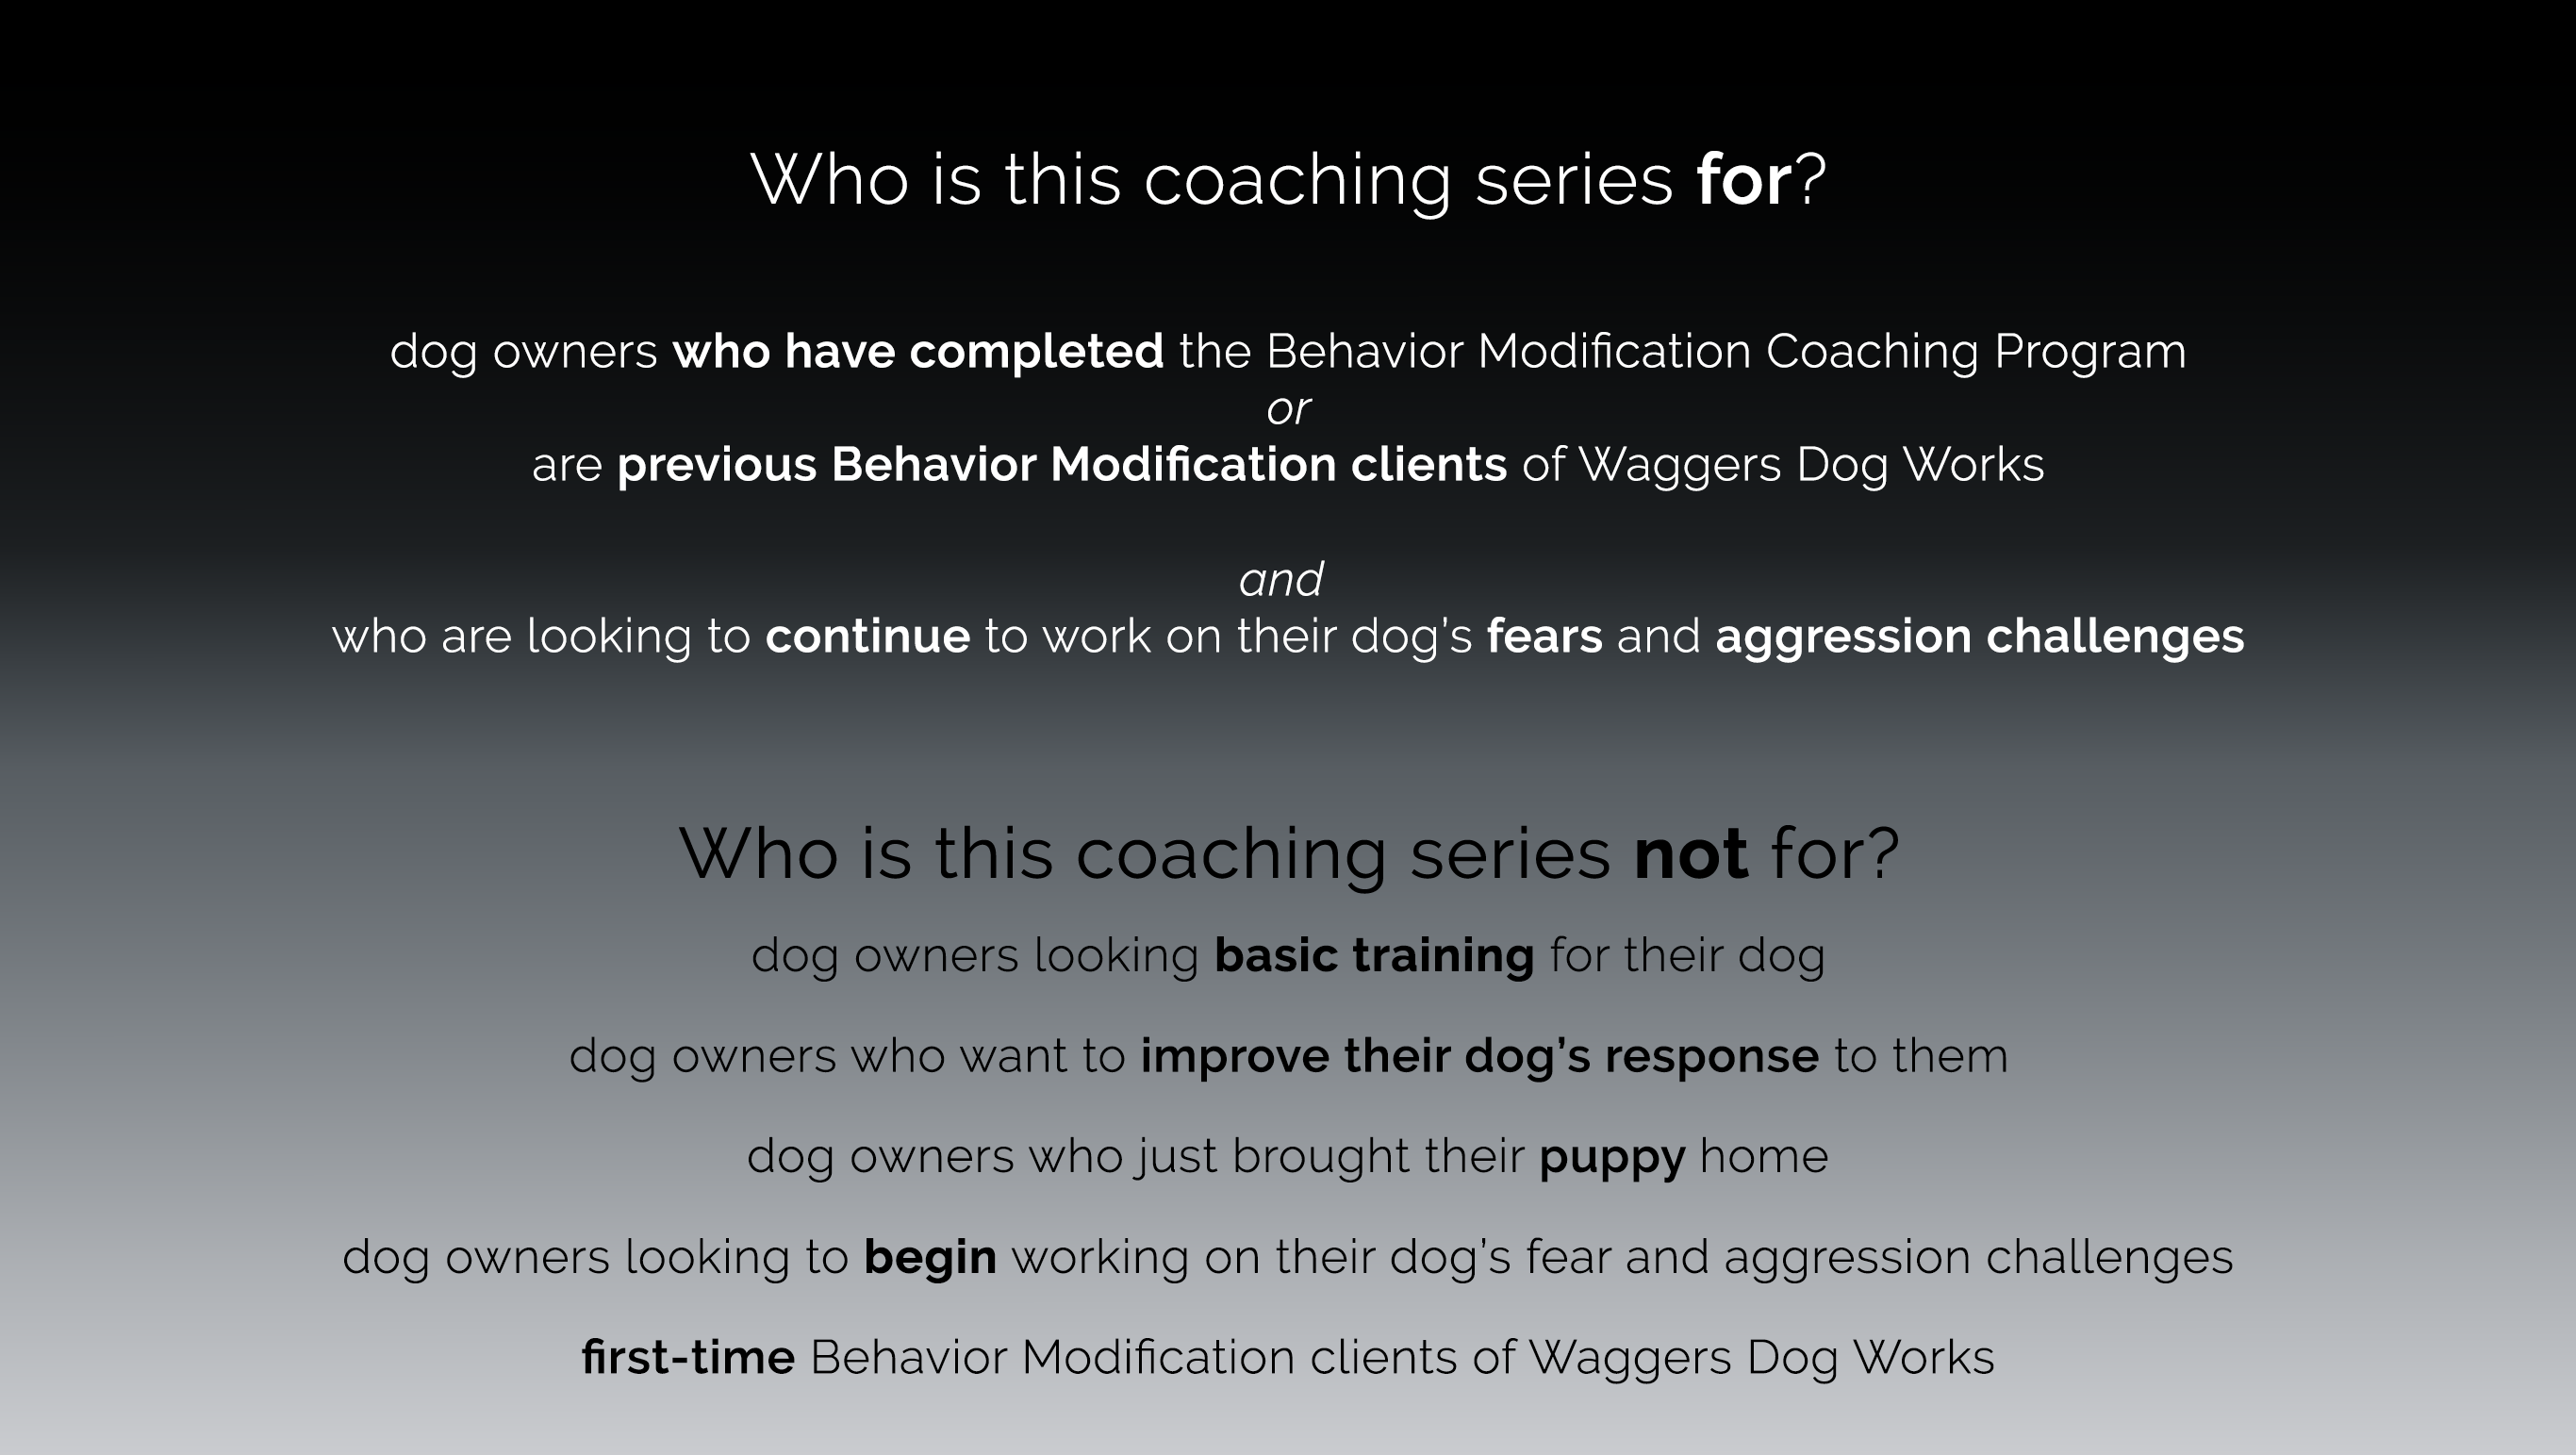 Intended Audience for this coaching series